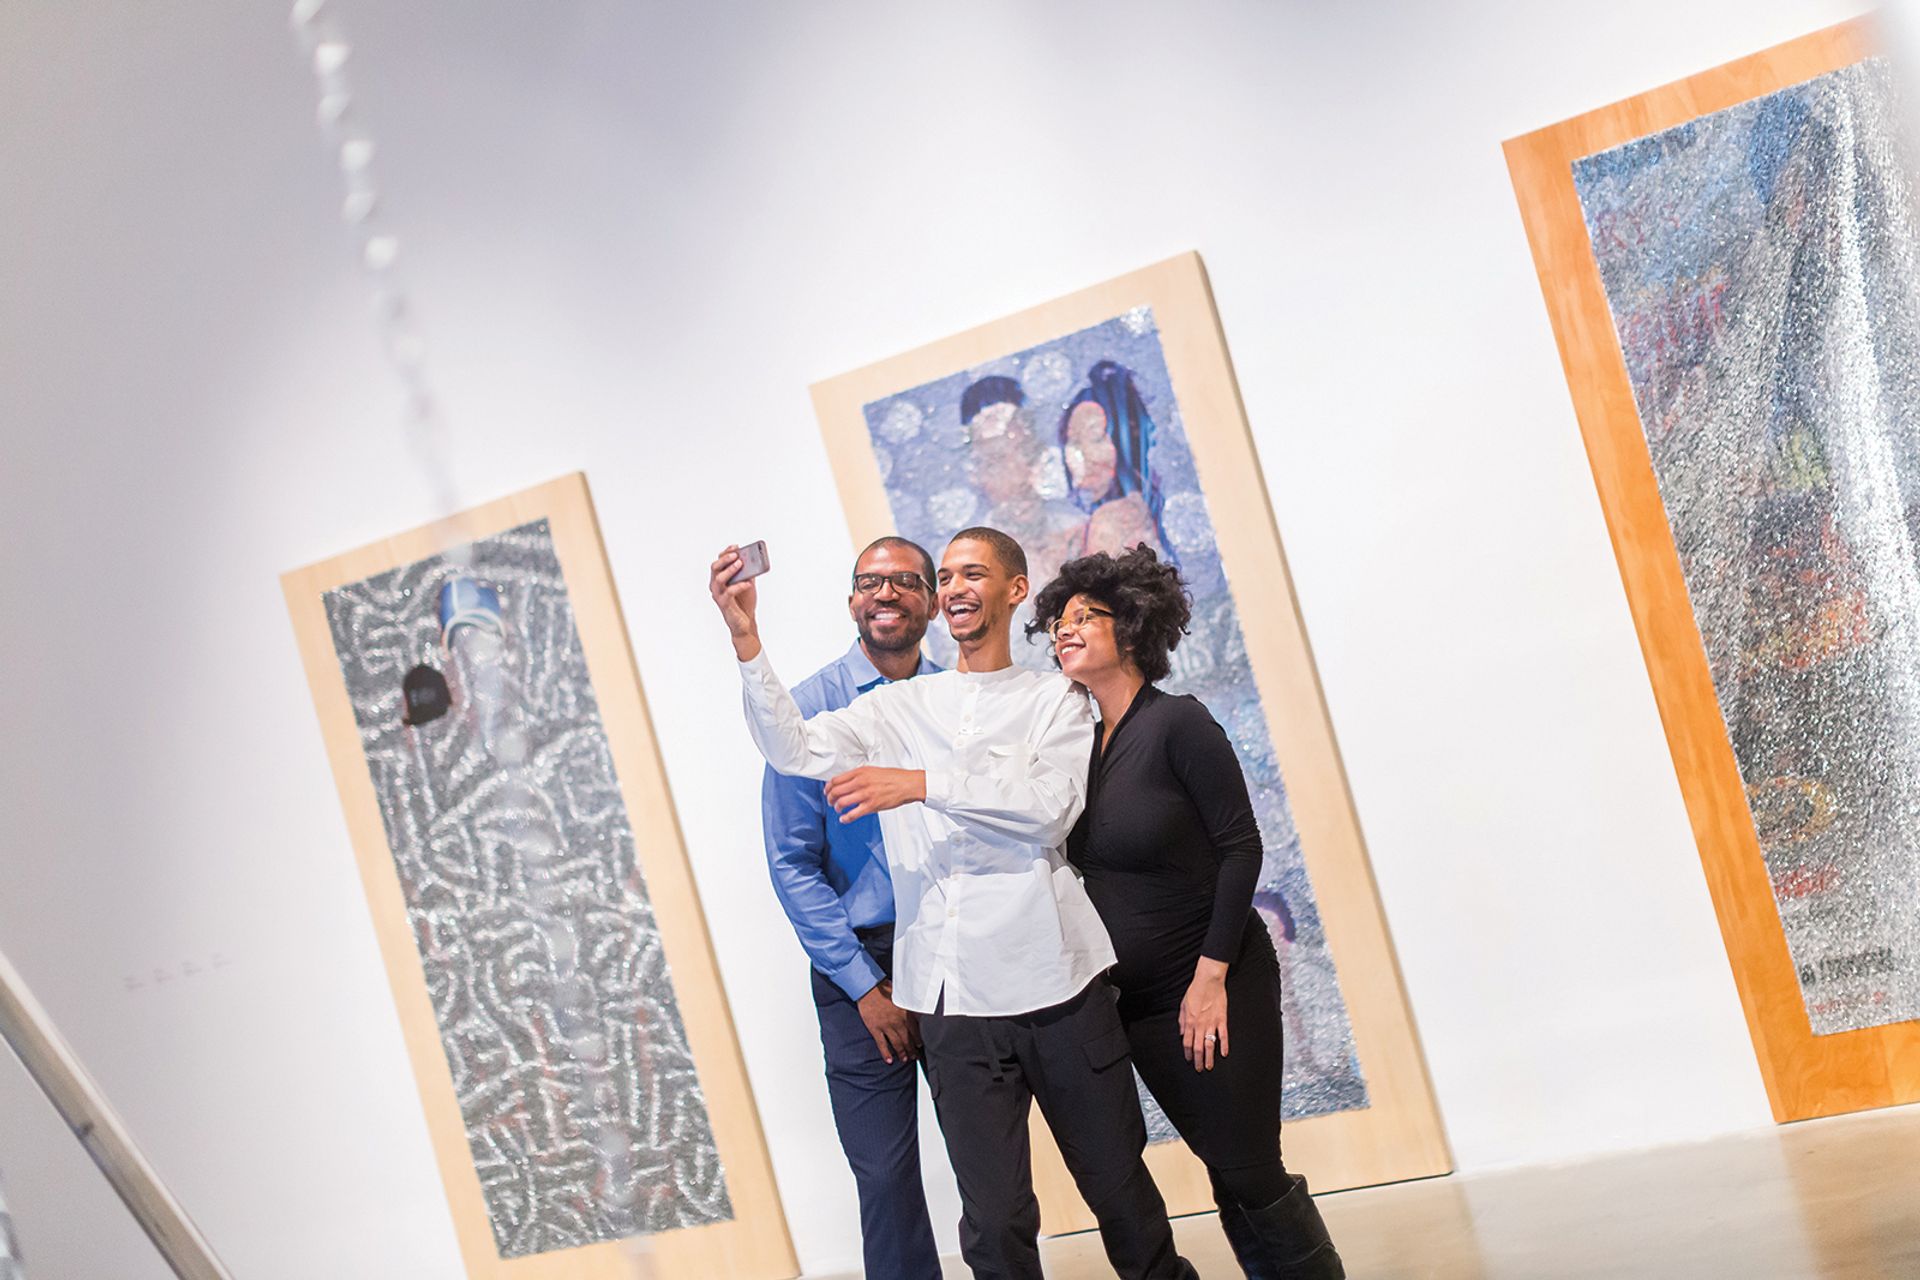 The artist Wilmer Wilson IV with friends at the New Museum Triennial Photo: Scott Rudd/Courtesy New Museum